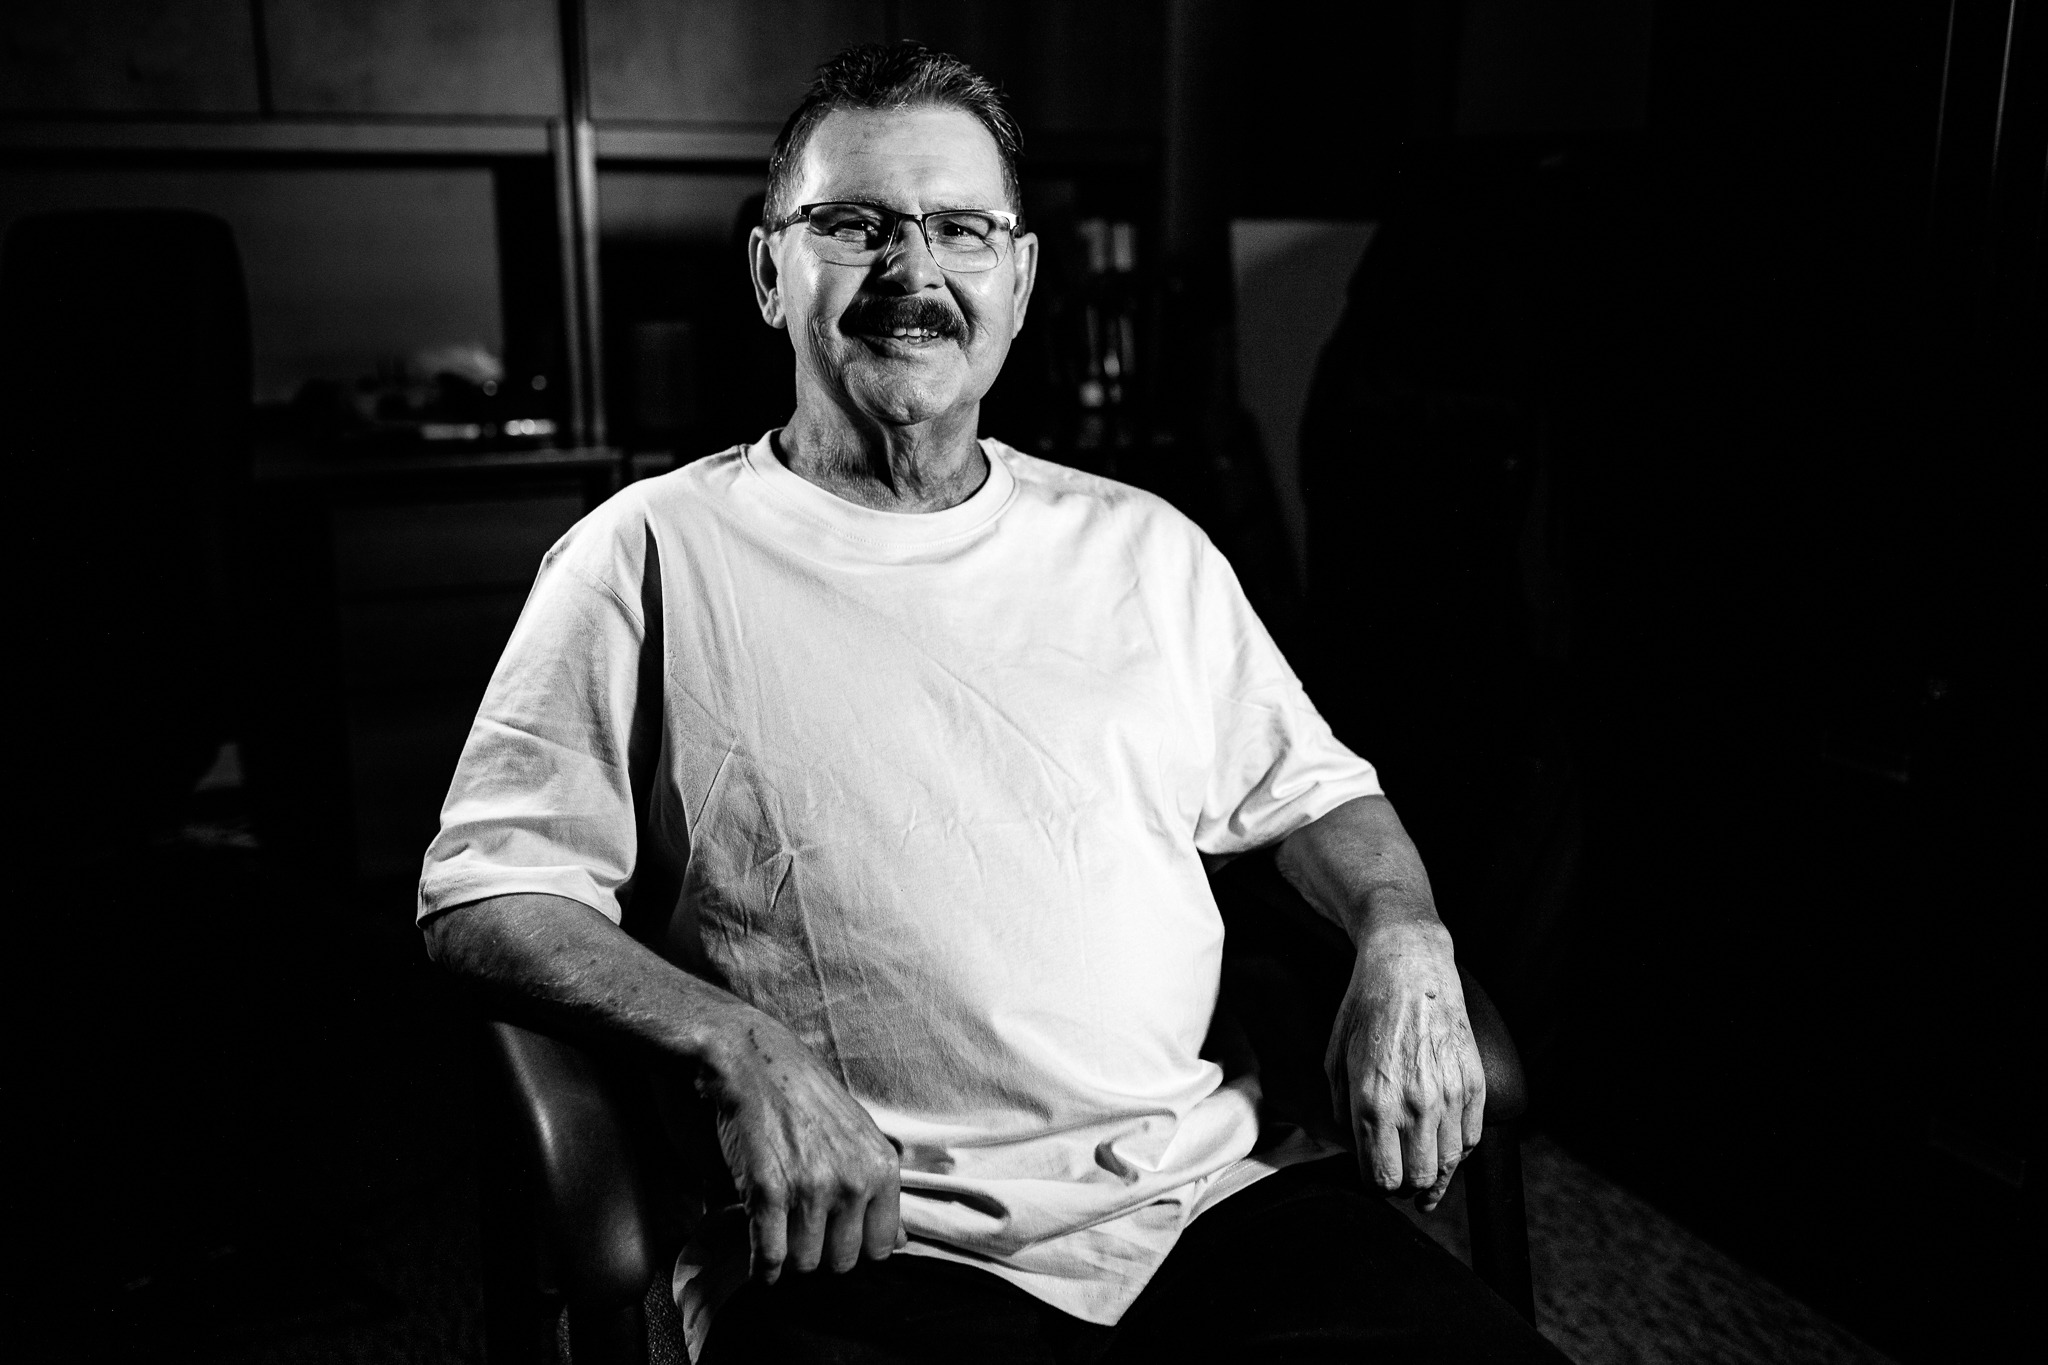 Black and white portrait of patient Danny Prosic, seated